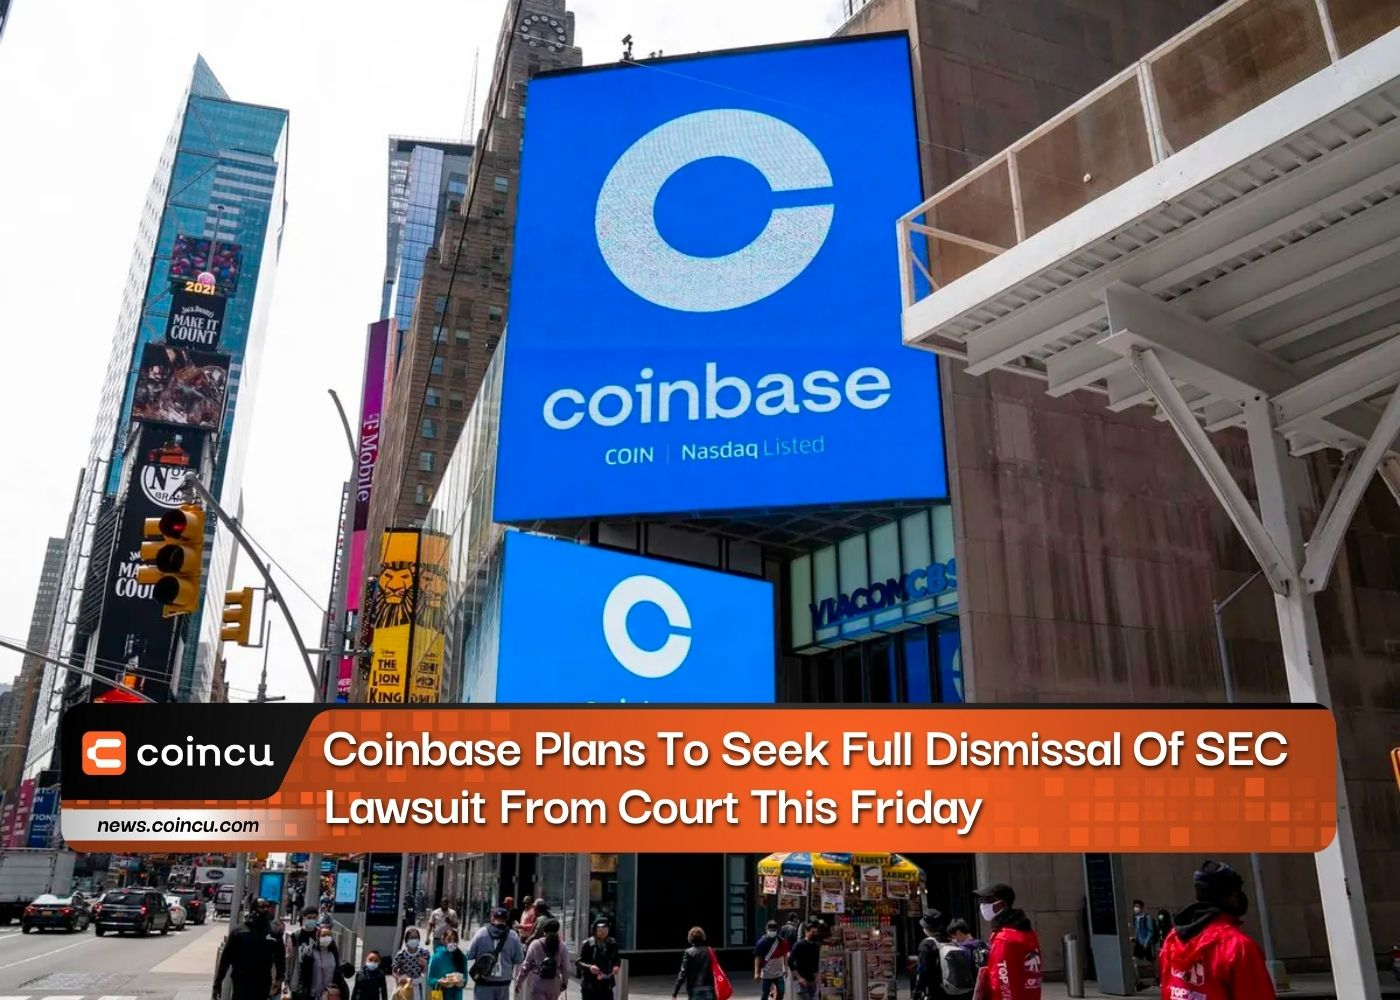 Coinbase Plans To Seek Full Dismissal Of SEC Lawsuit From Court This Friday